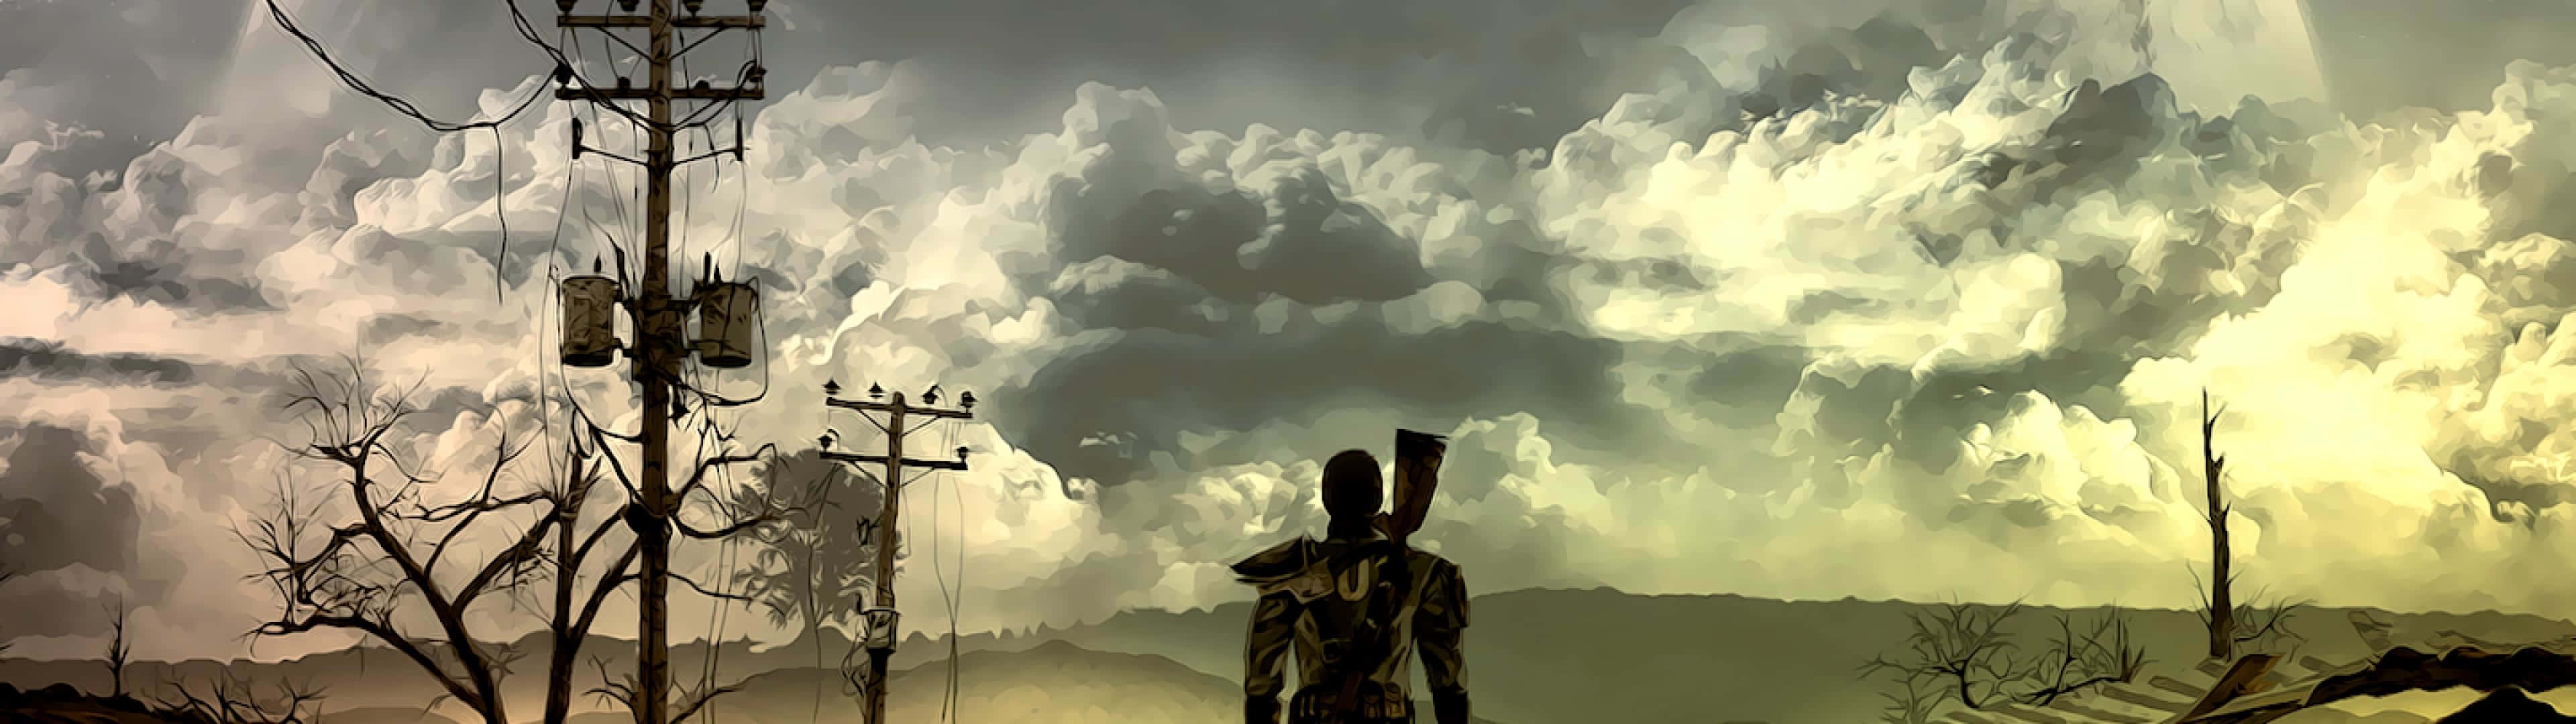 Explore The Post-apocalyptic World Of Fallout: New Vegas Wallpaper